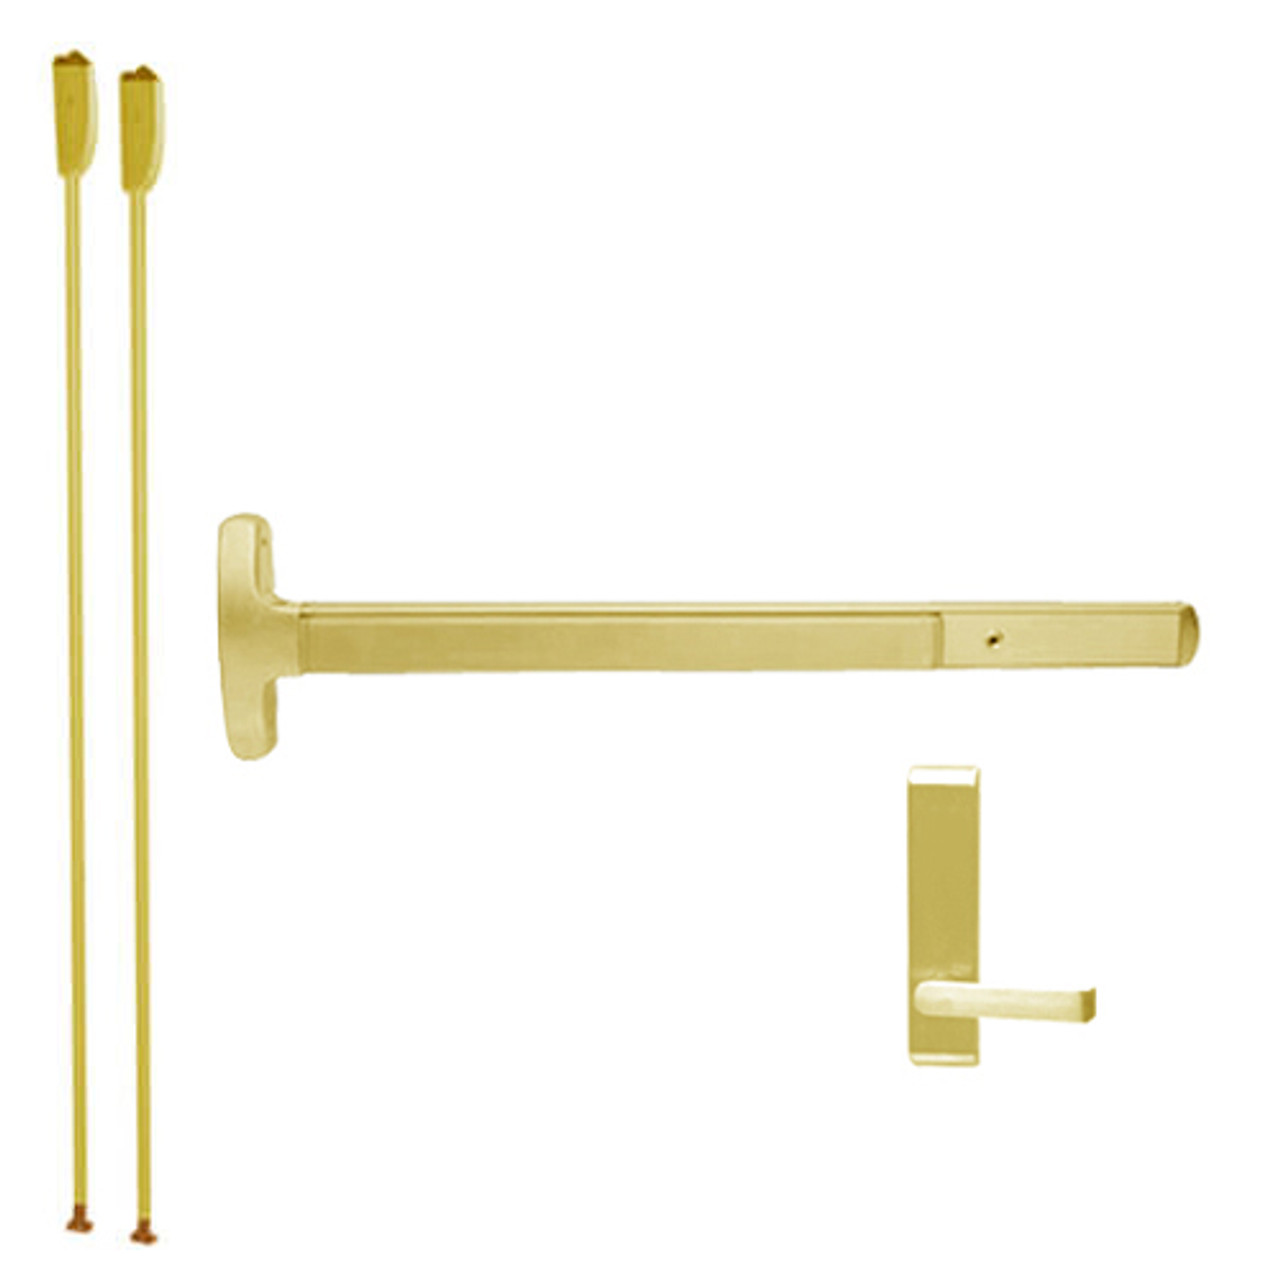 24-V-L-DT-Dane-US3-3-LHR Falcon Exit Device in Polished Brass